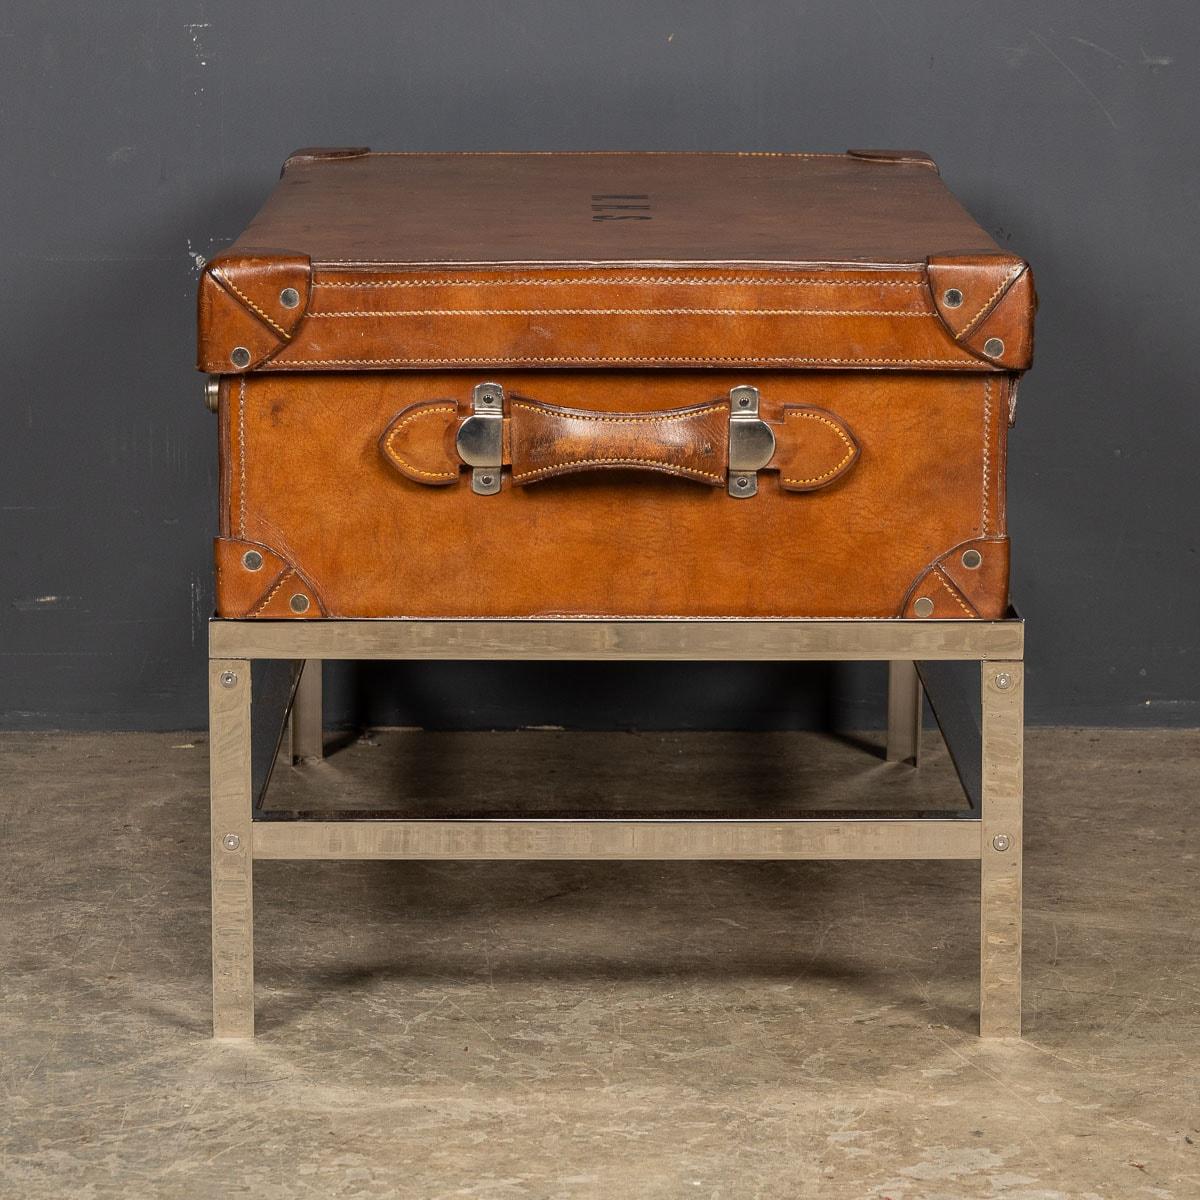 Antique early 20th Century trunk, lined with the original fabric in a champagne colour. This trunk comes with original polished metal locks and leather handles. Applied on the trunk lid is the initials W.H.S. Inside the trunk lid is a small pouch